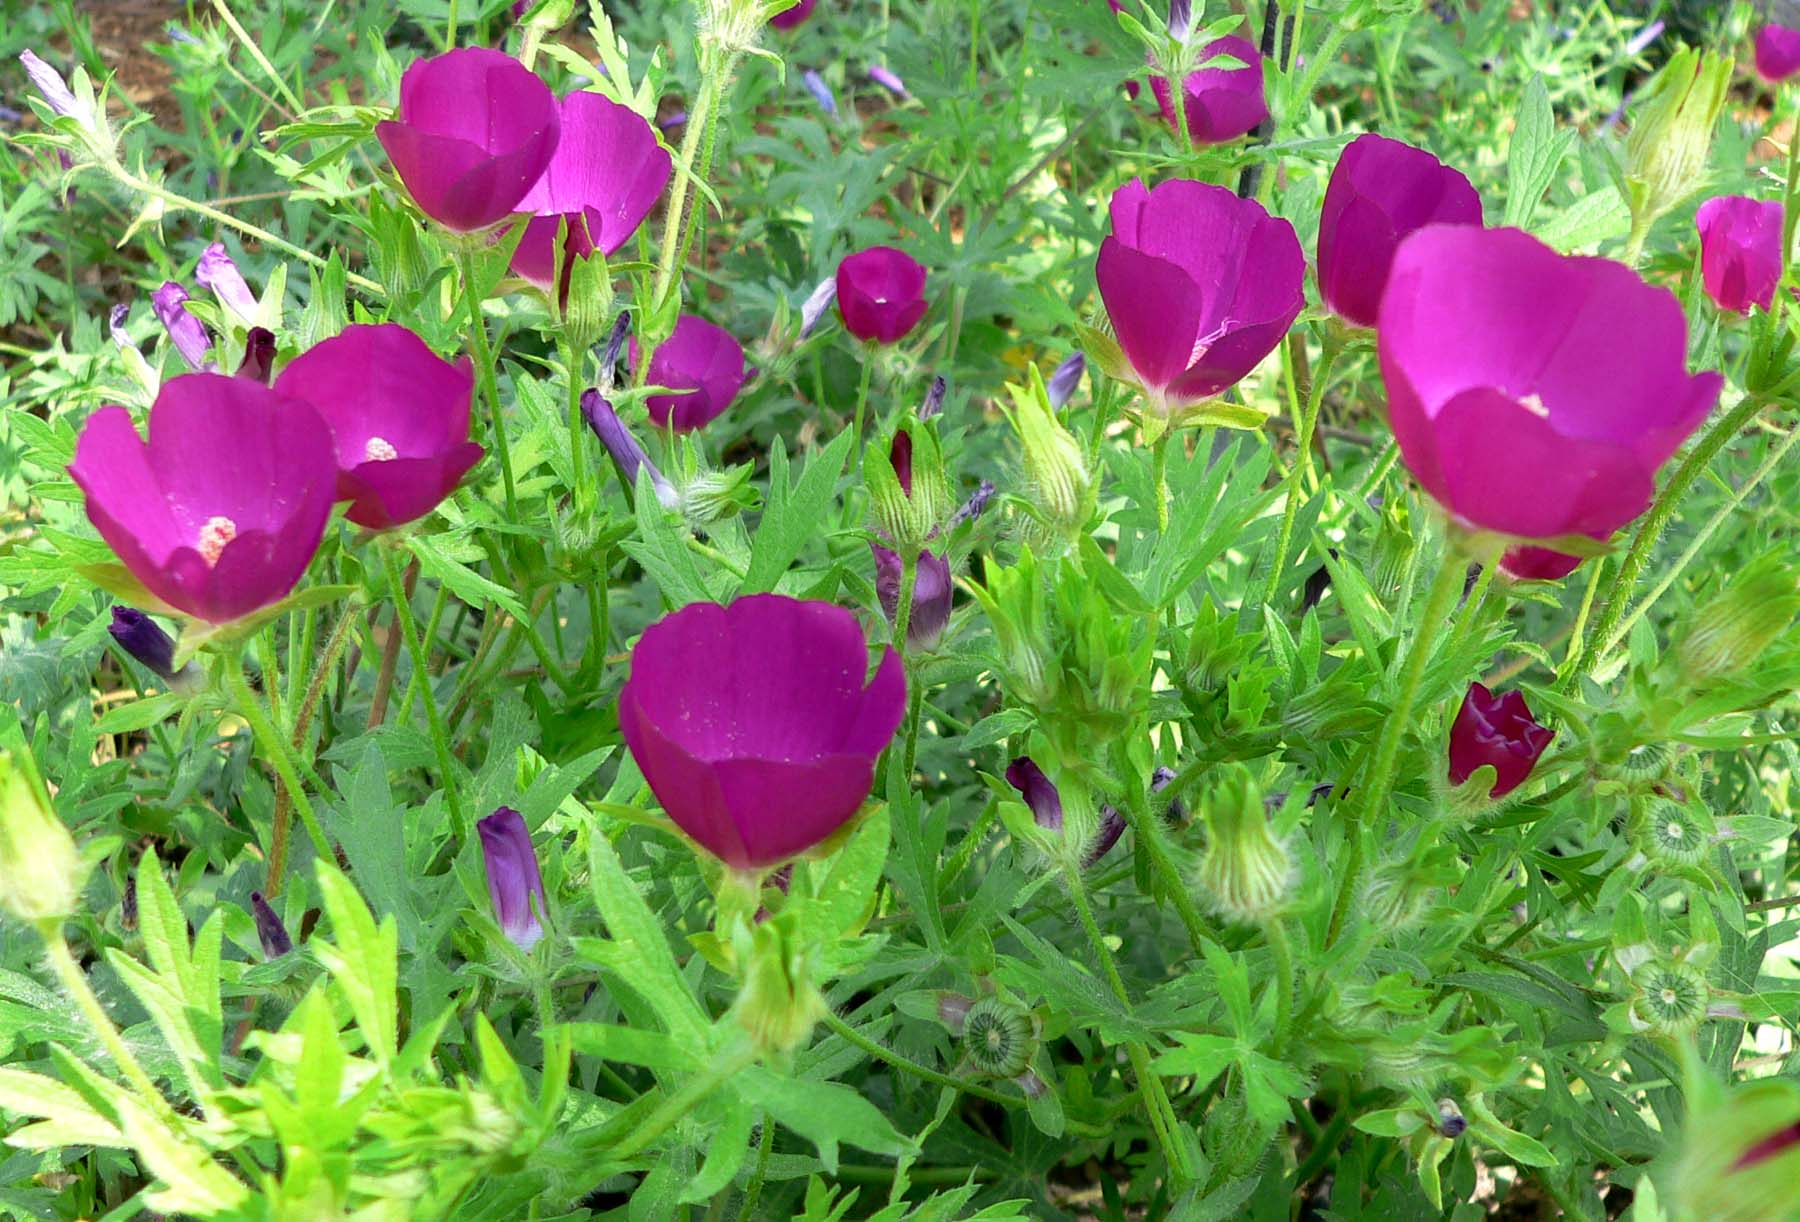 Close up of the purple poppy mallow flowers